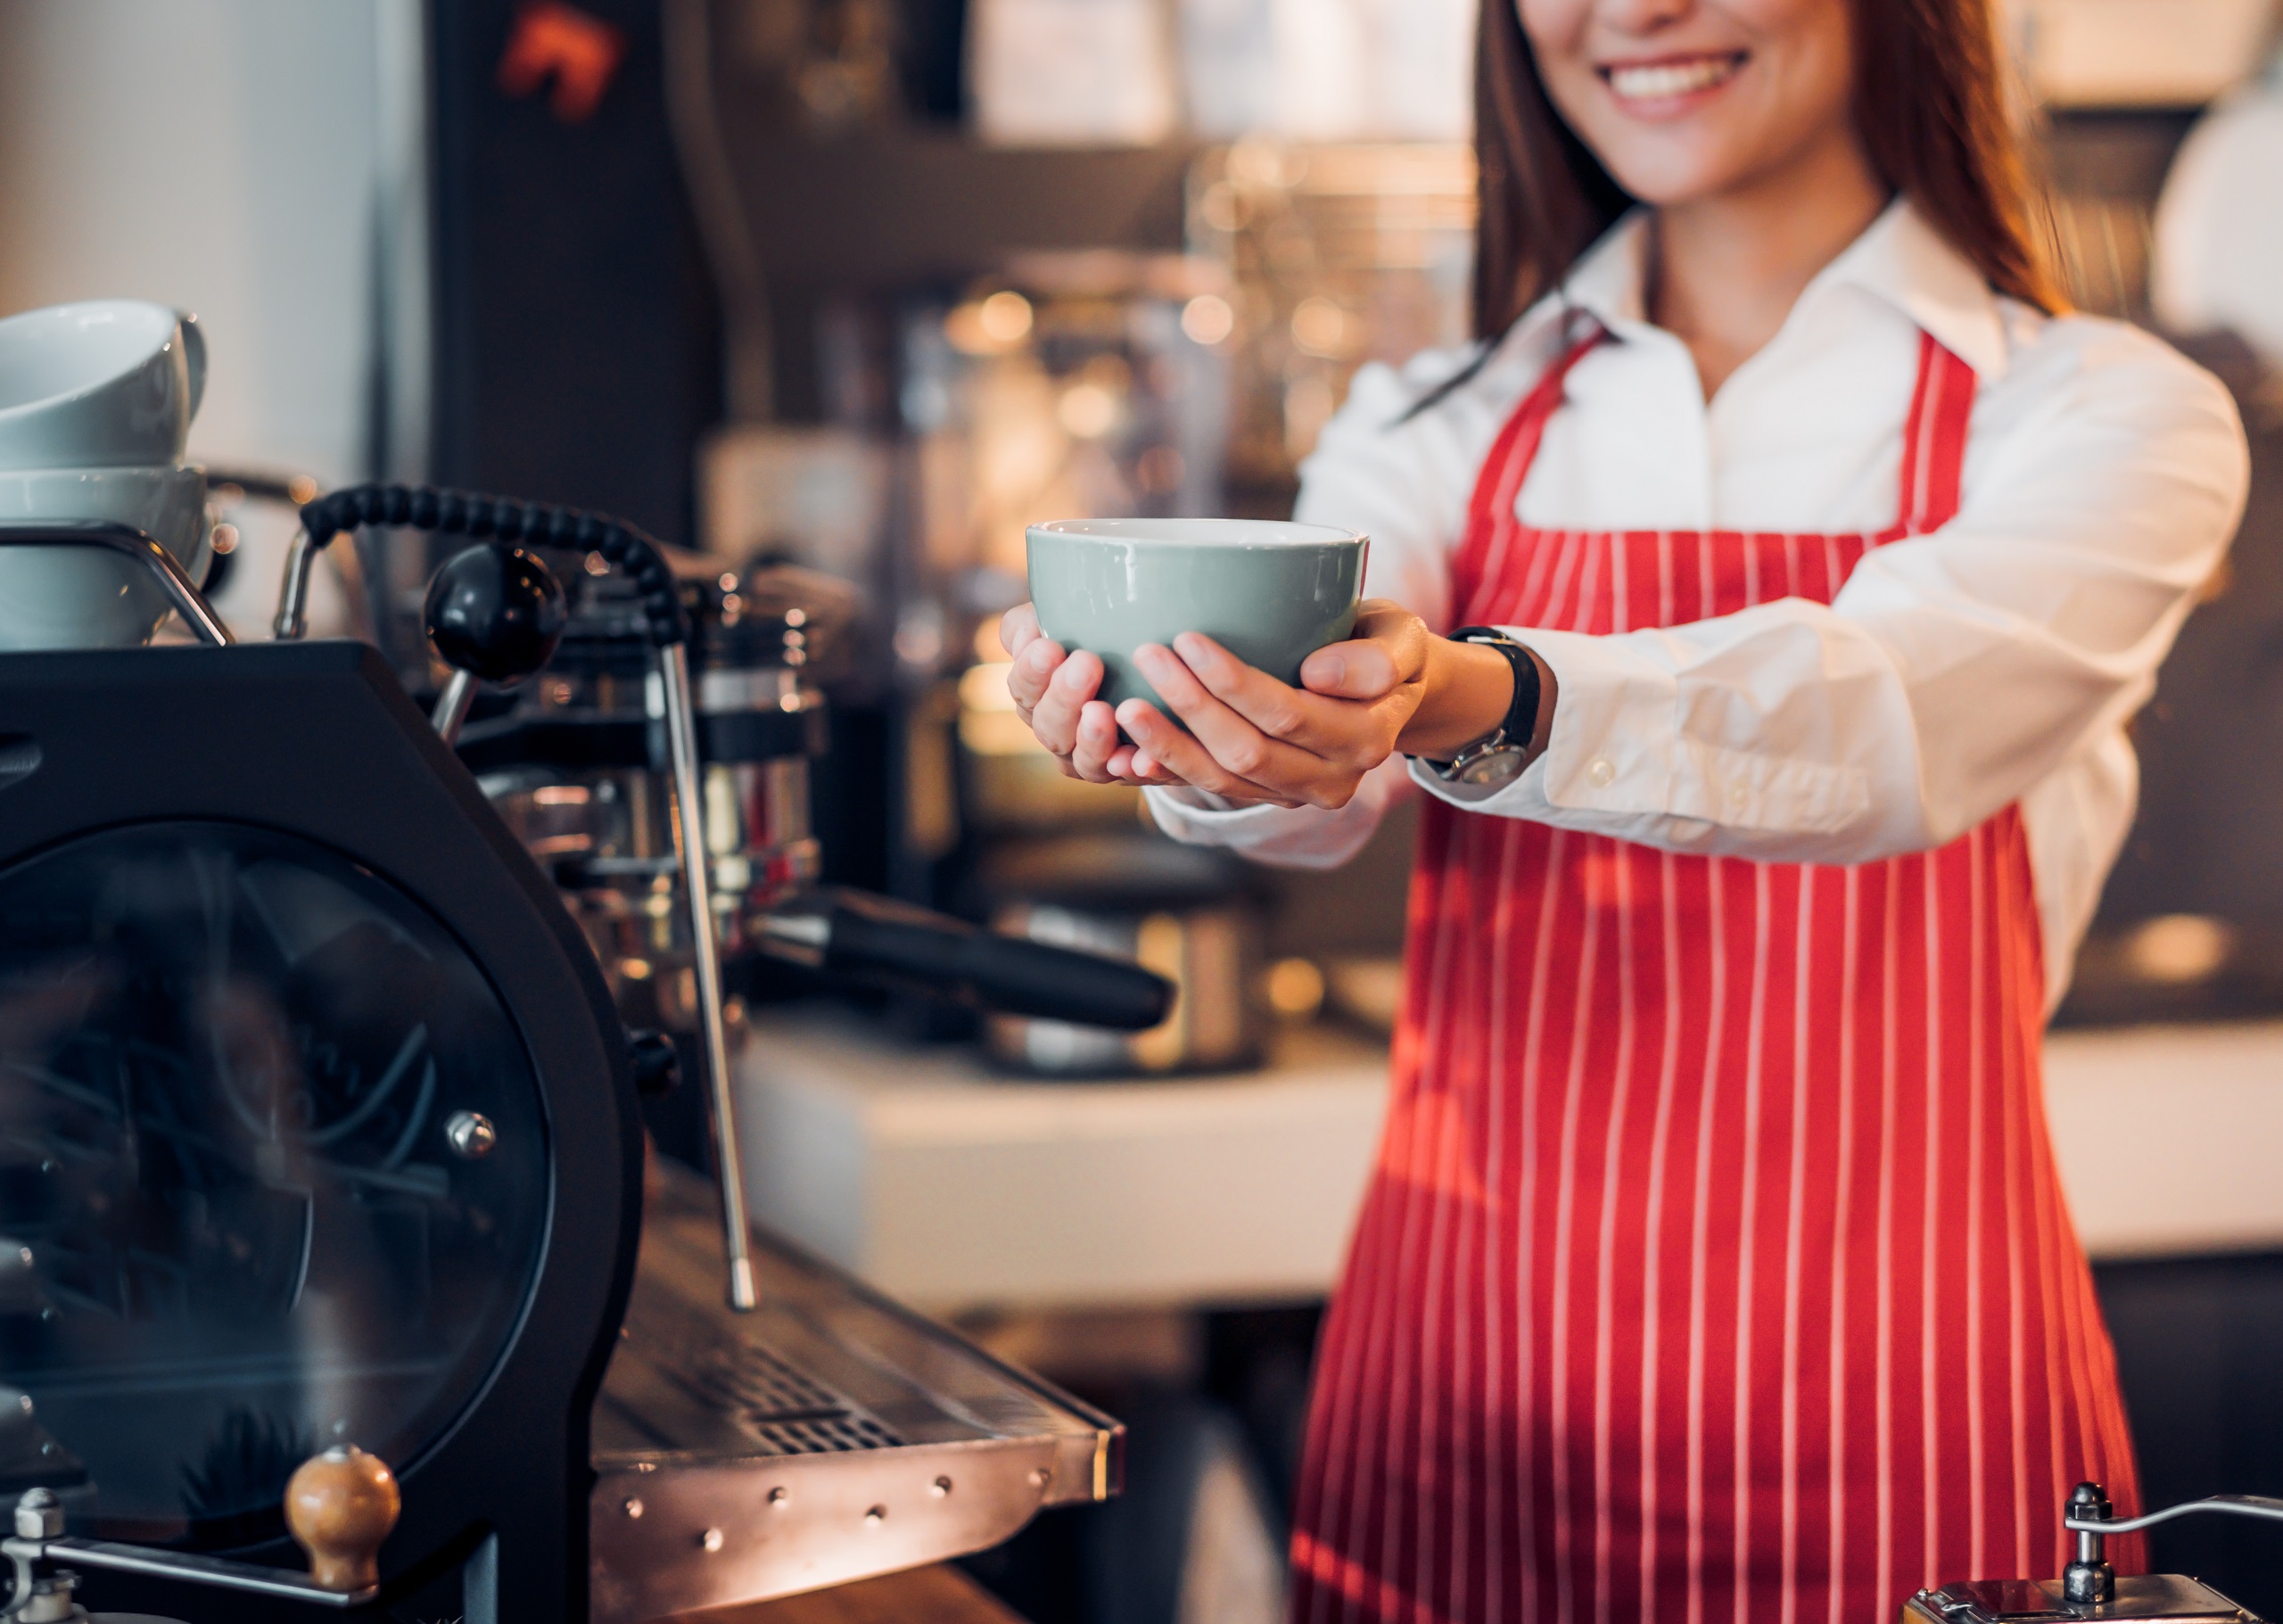 Close up a woman wearing a red and white striped apron cupping a coffee mug with both hands extended as if offering it to someone with a coffee shop in the background conceptualizing a free hot coffee.